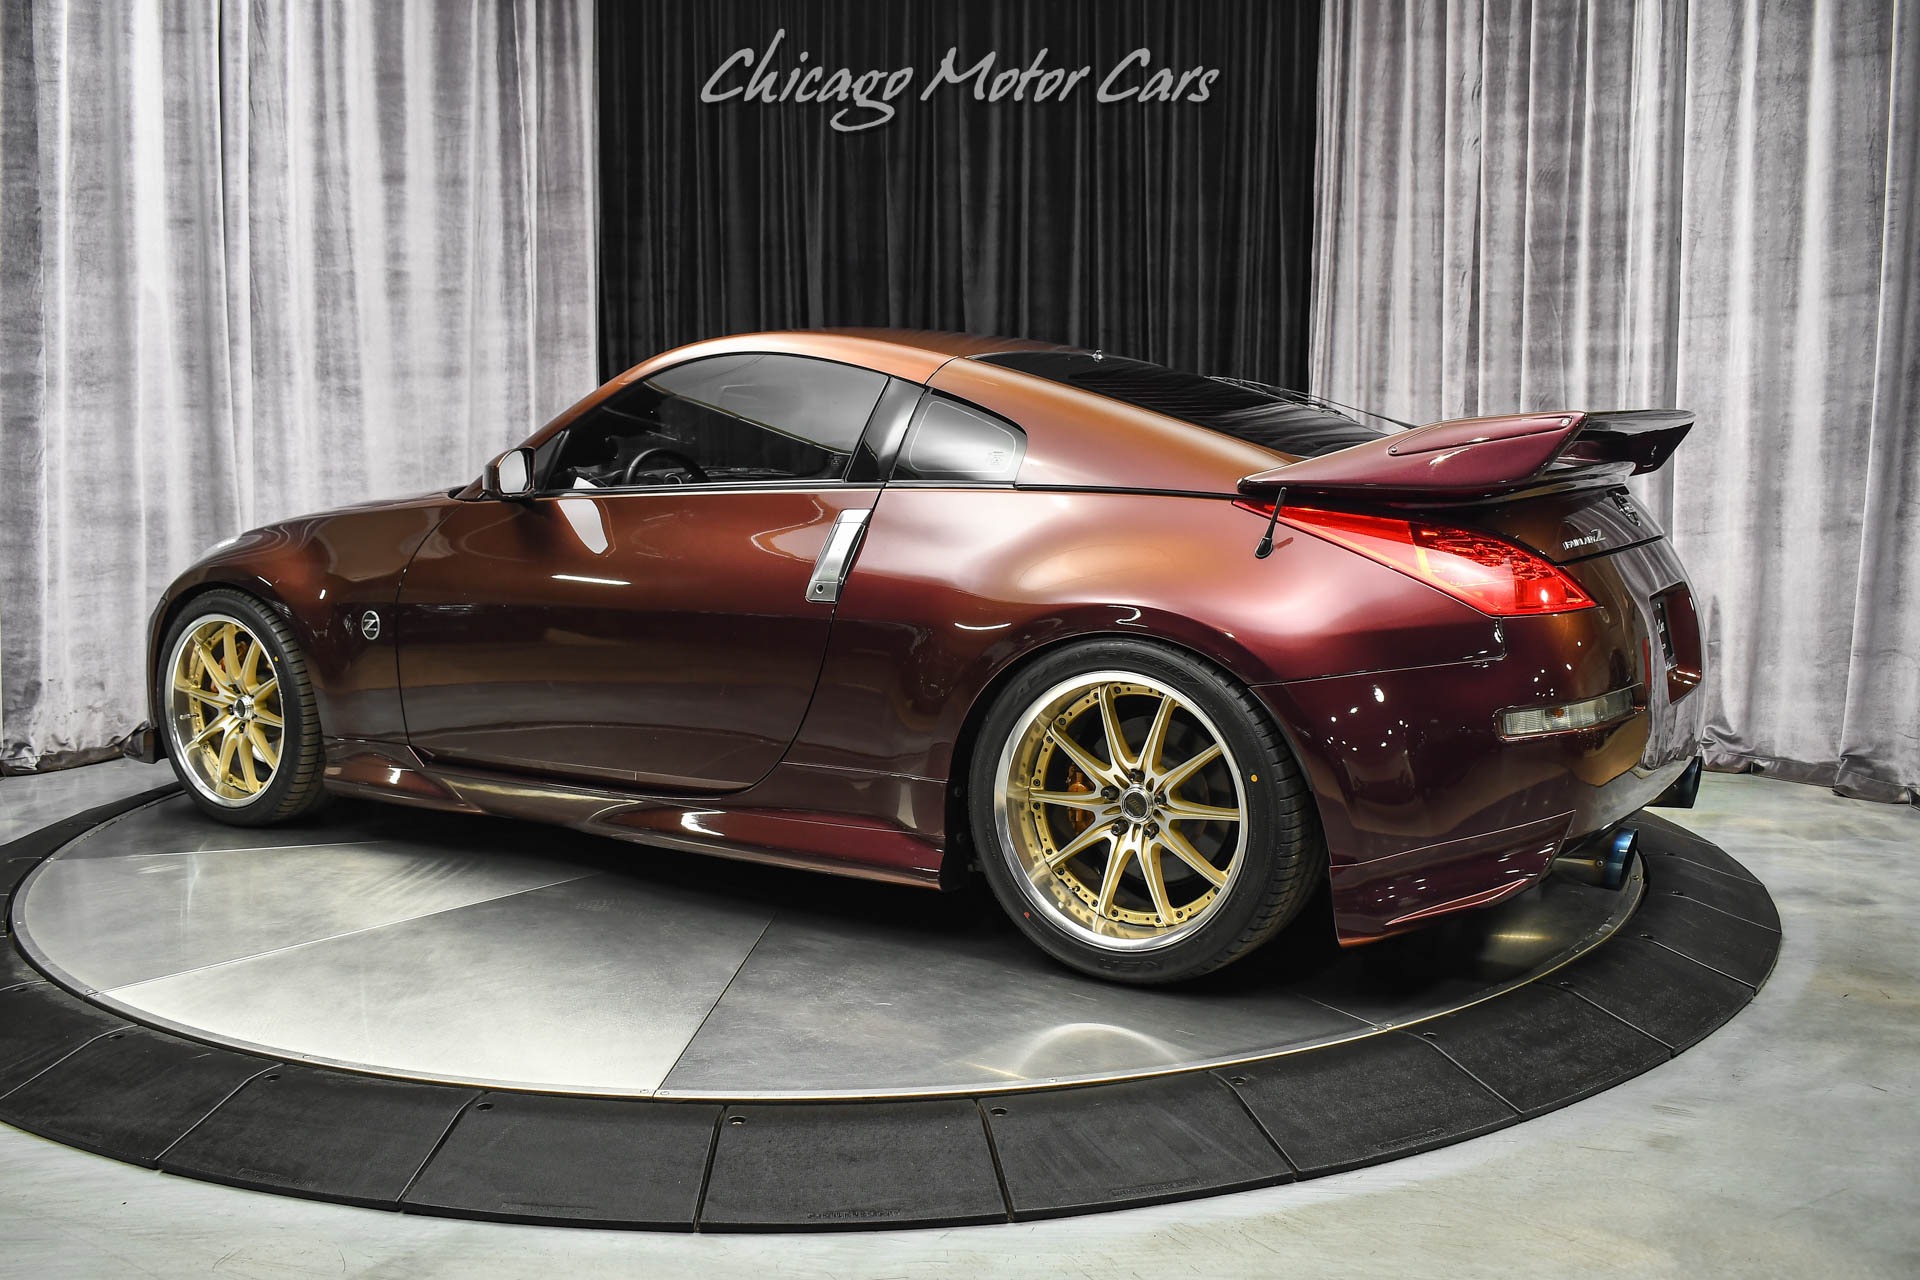 Used 2006 Nissan 350Z Grand Touring! GReddy Twin Turbo! 6-Speed! RARE  Color! For Sale ($24,800) | Chicago Motor Cars Stock #6M312710-HS